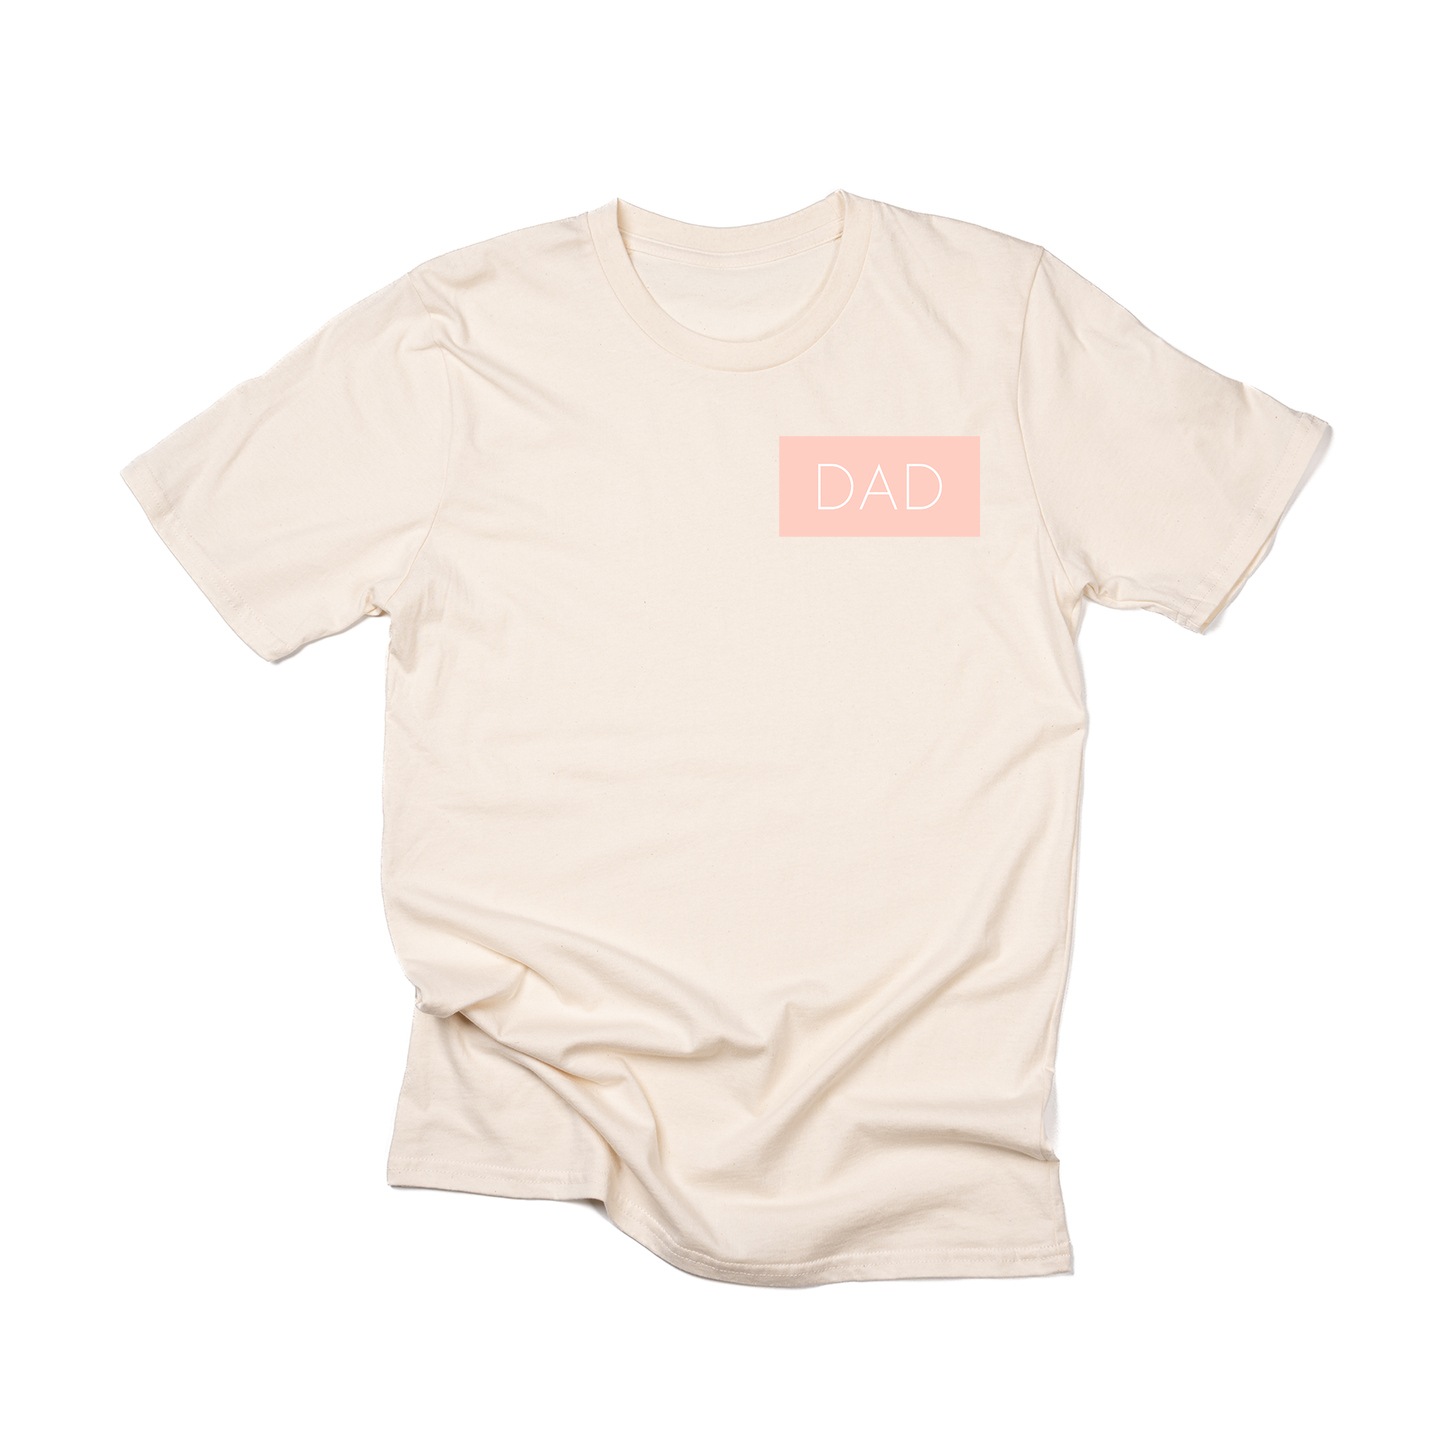 Dad (Boxed Collection, Pocket, Ballerina Pink Box/White Text) - Tee (Natural)